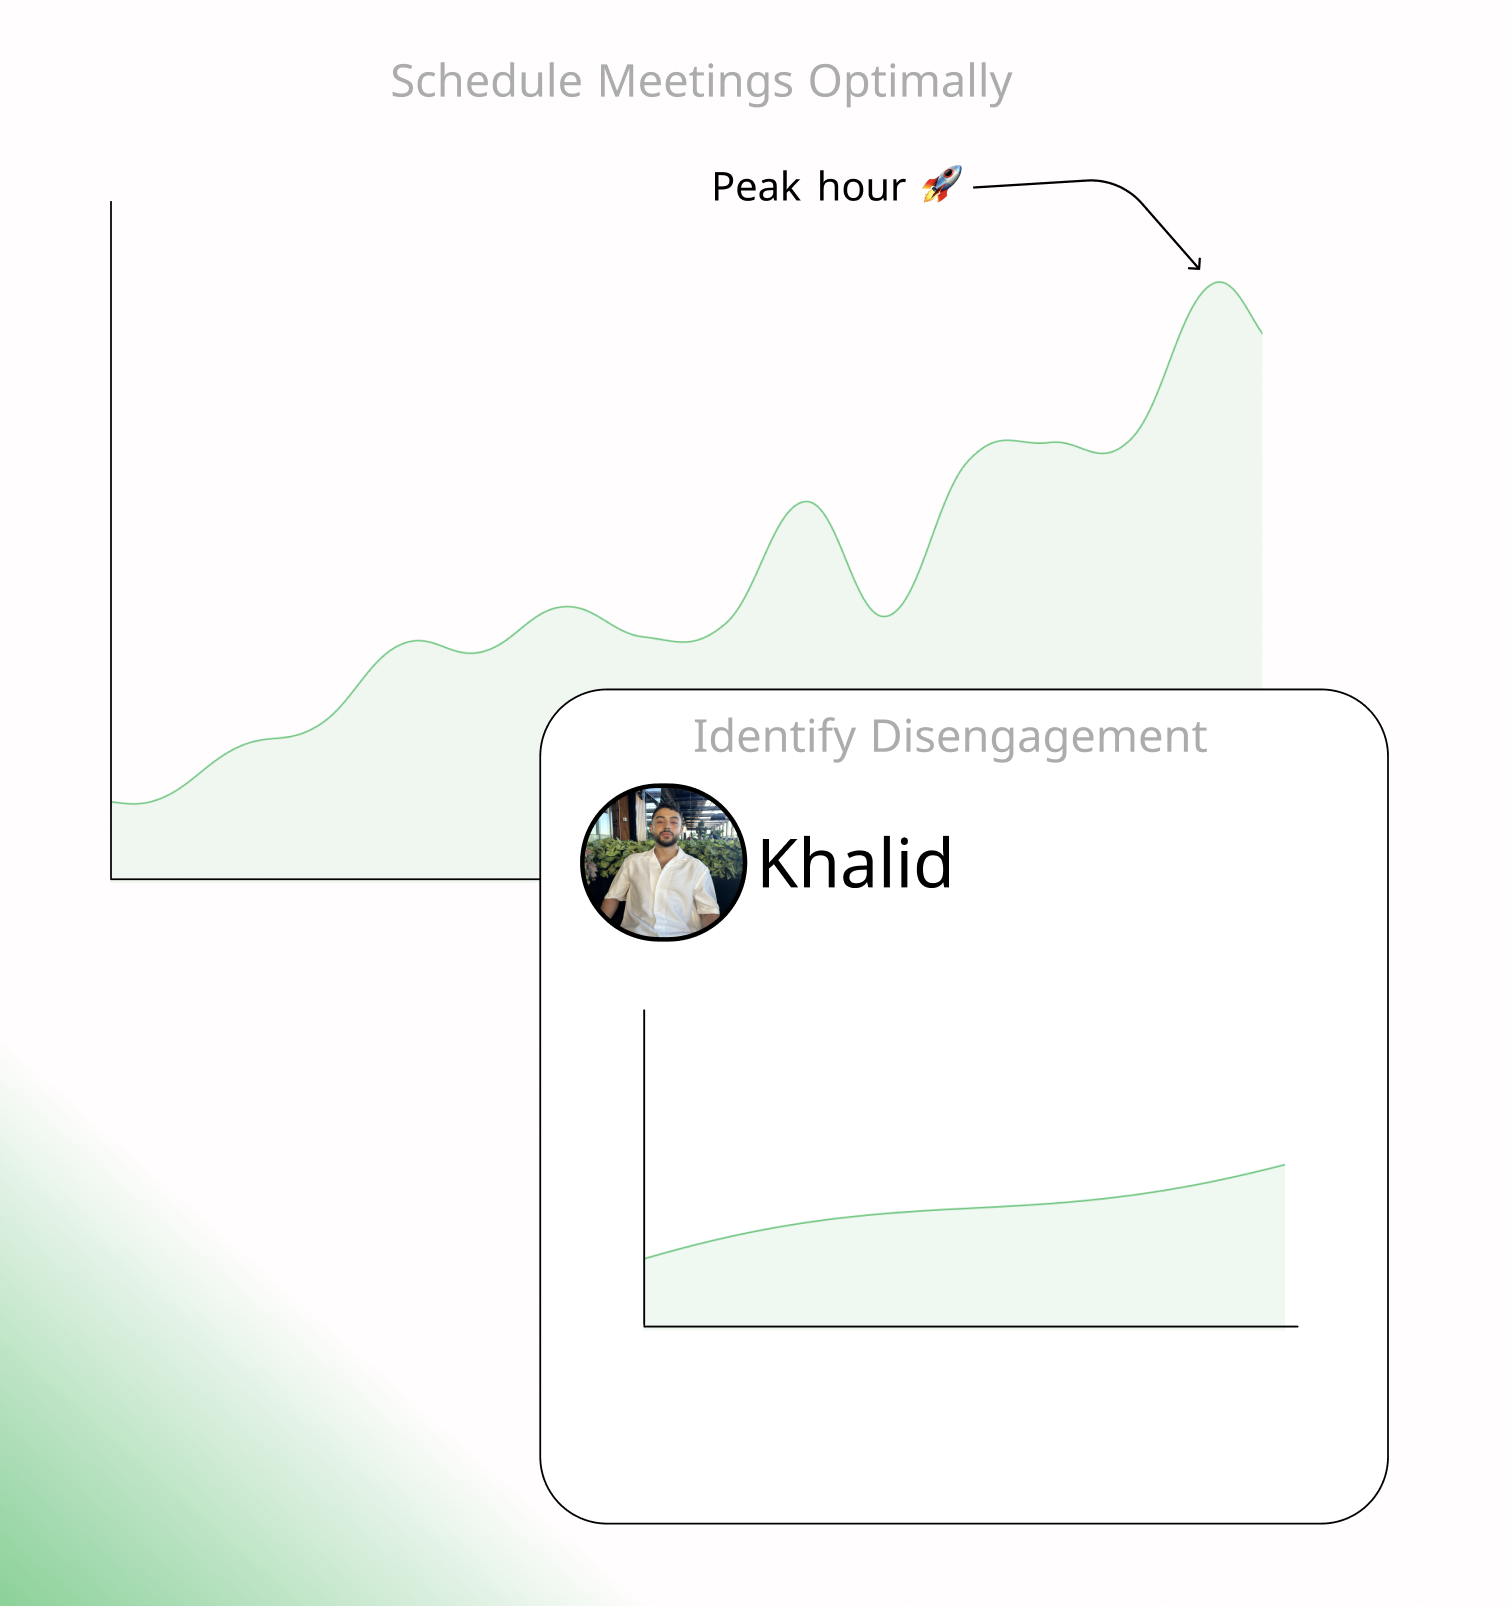 CommuniFlow Visualize Engagement 🚀 - Our tools help you understand your team's trends. Schedule meetings at optimal times, visualize team member disengagement, take action.